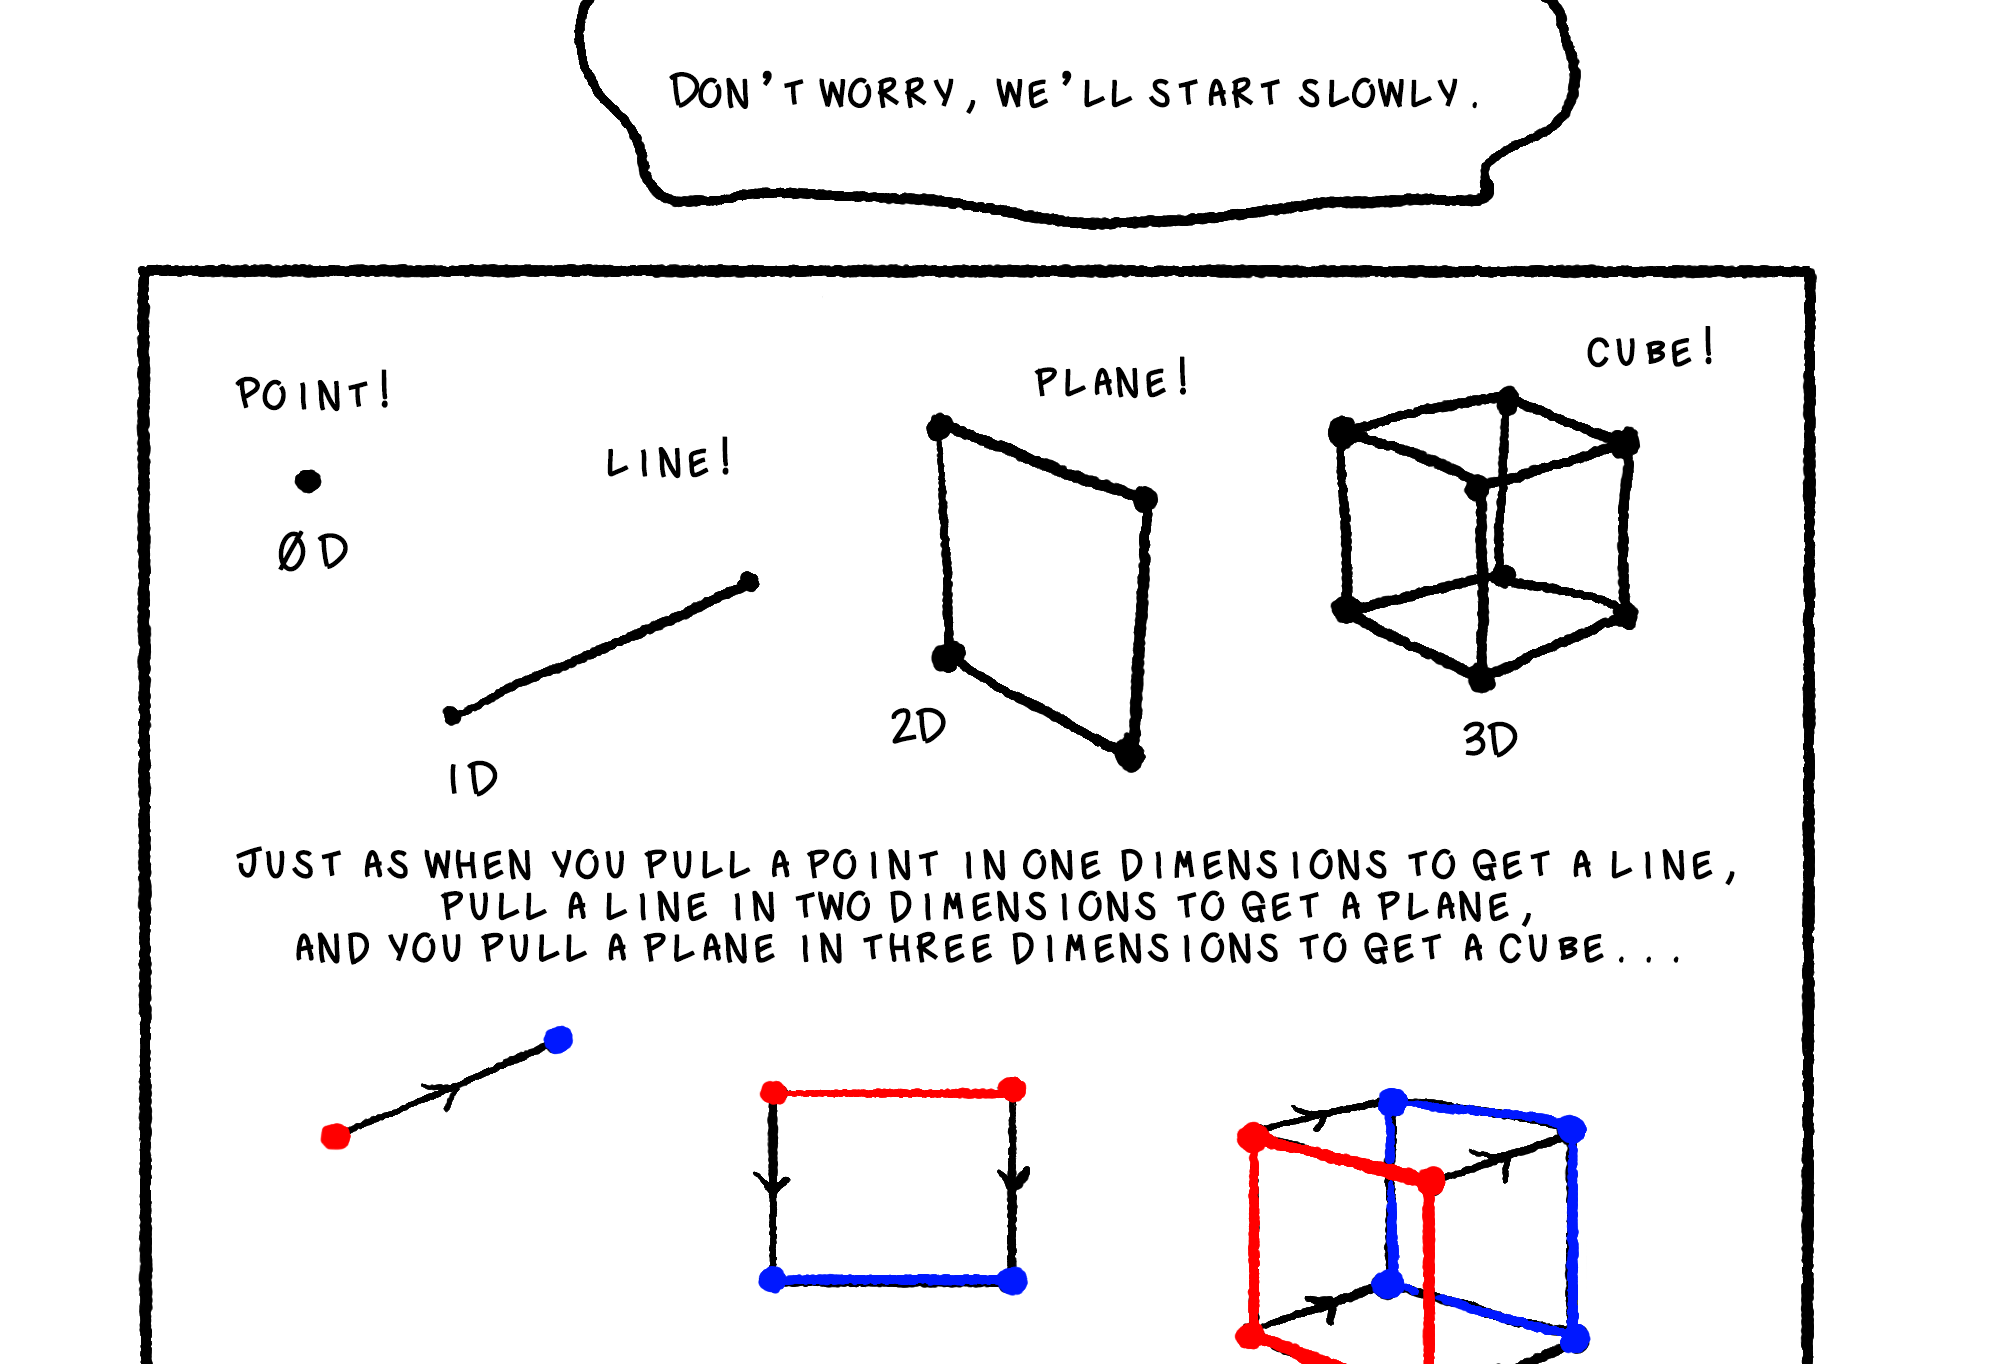 Don't worry, we'll start slowly, a speech bubble reads. In a square delineates the basics of dimensions. A dot marked 0D is labelled point, two dots connected marked 1D is labelled line, four dots connected in a square shape marked 2D is labelled plane, and 8 dots connecting 6 planes marked 3D is labelled cube! The narration reads: Just as when you pull a point in one dimensions to get a line, pull a line in two dimensions to get a plane, and you pull a plane in three dimensions to get a cube... a hypercube is a cube pulled into four dimensions. Imagine the 3D sides of the hypercube are being projected outwards into the fourth dimension.